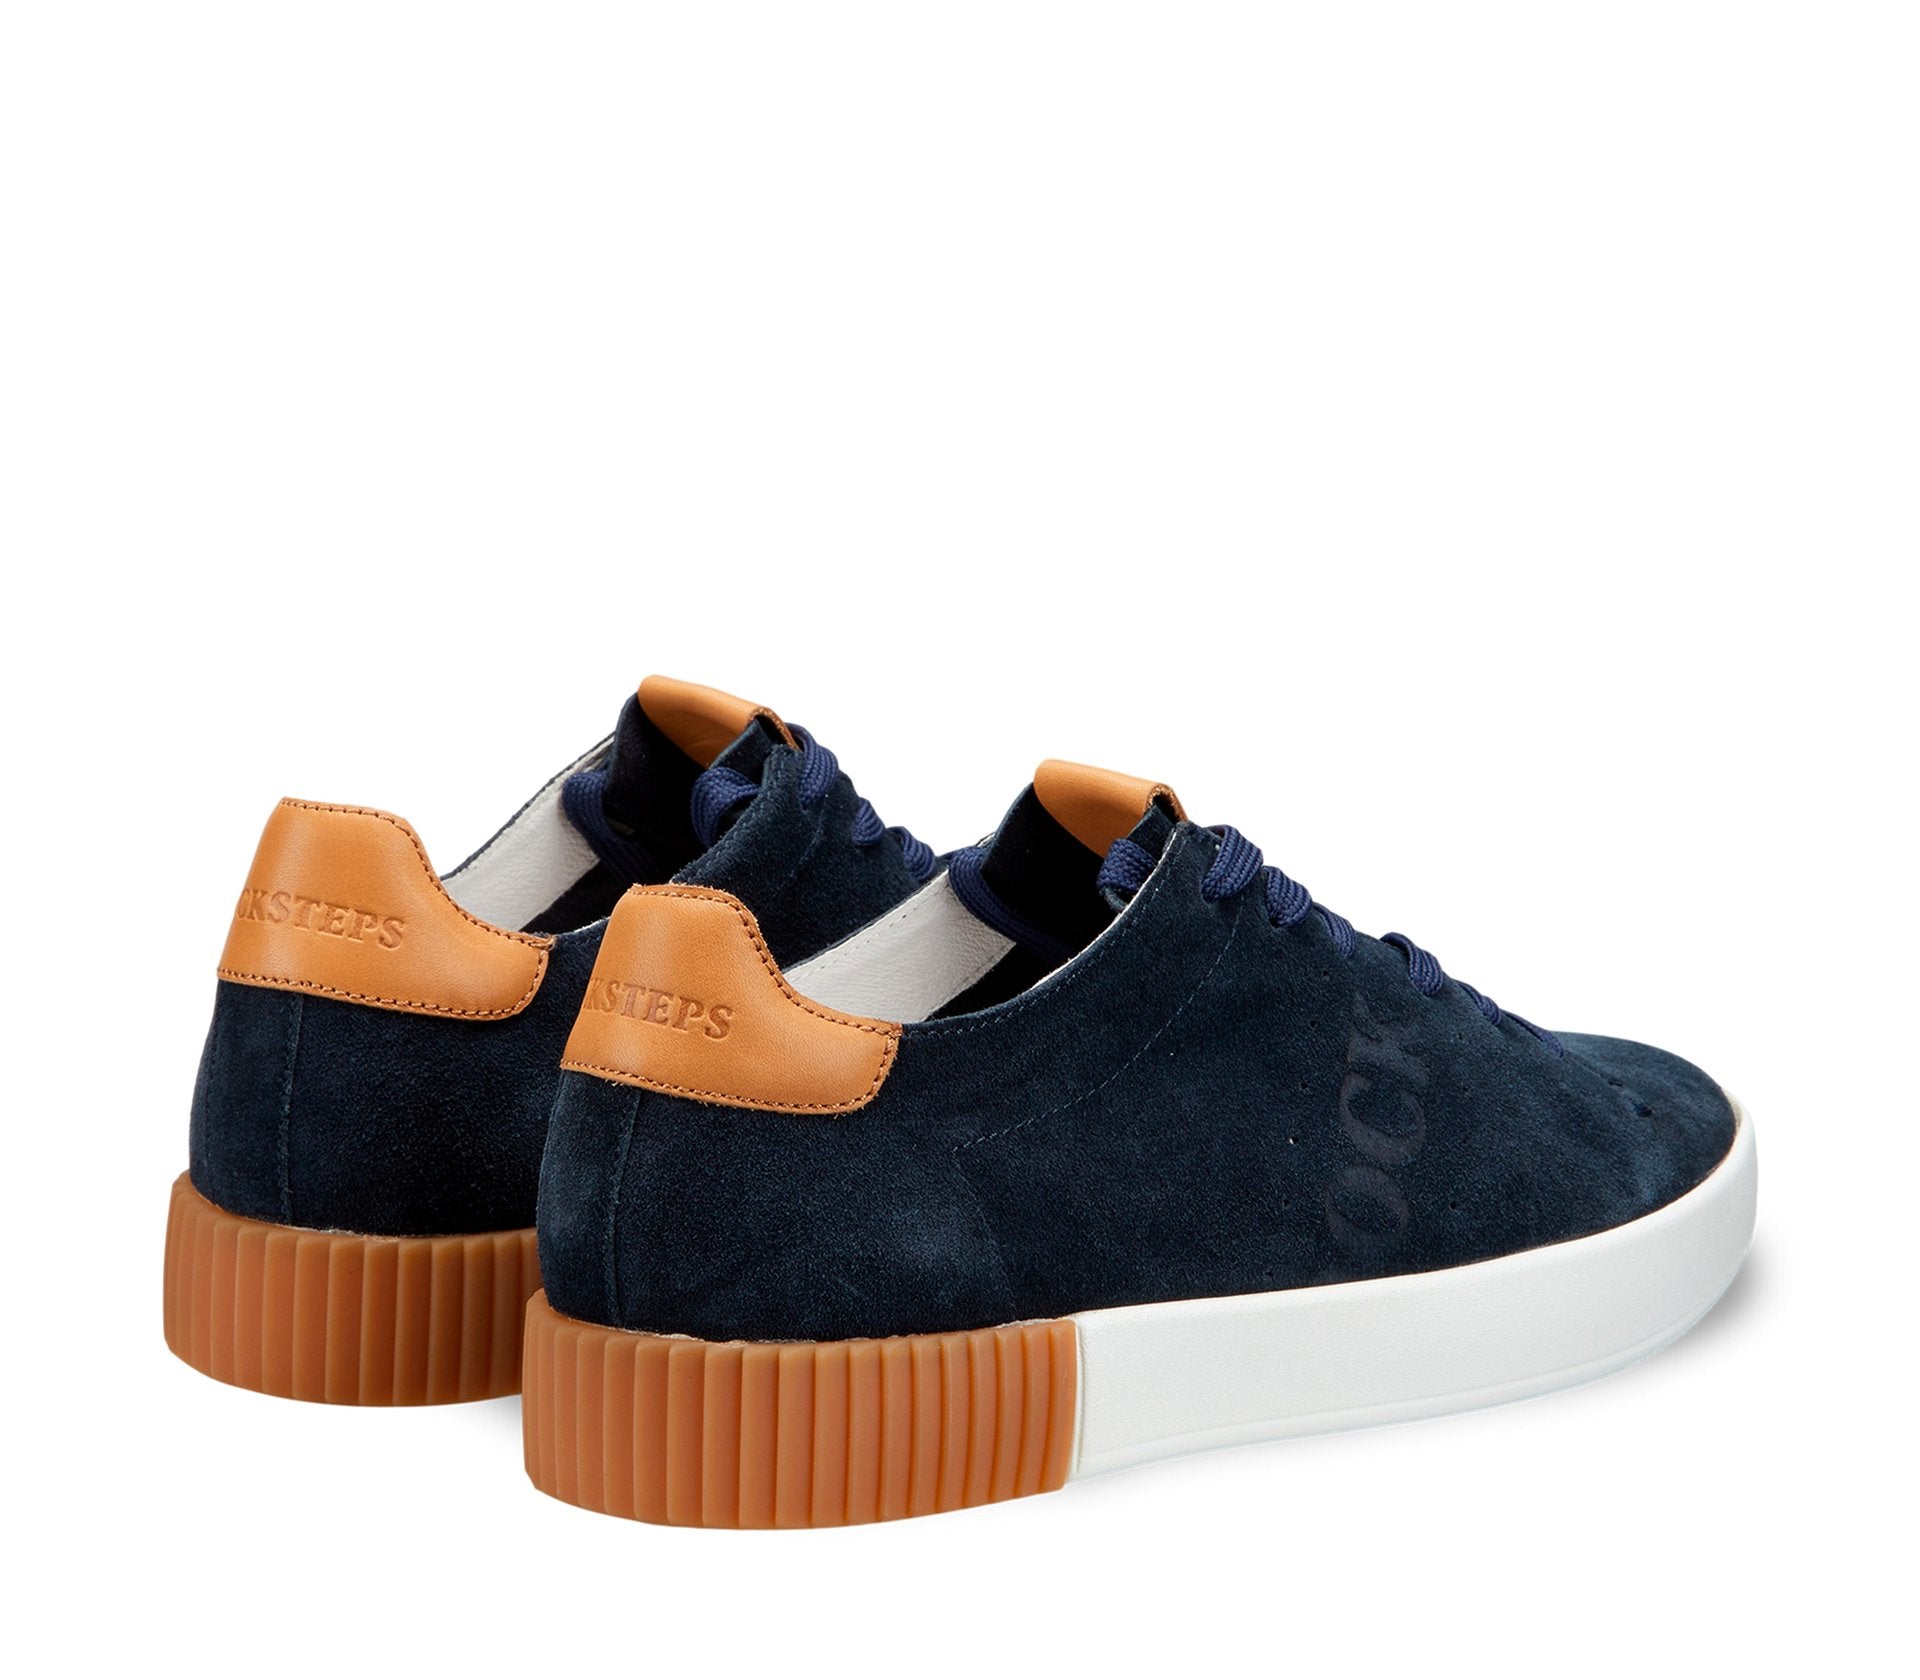 Docksteps men's mixed leather/suede trainers